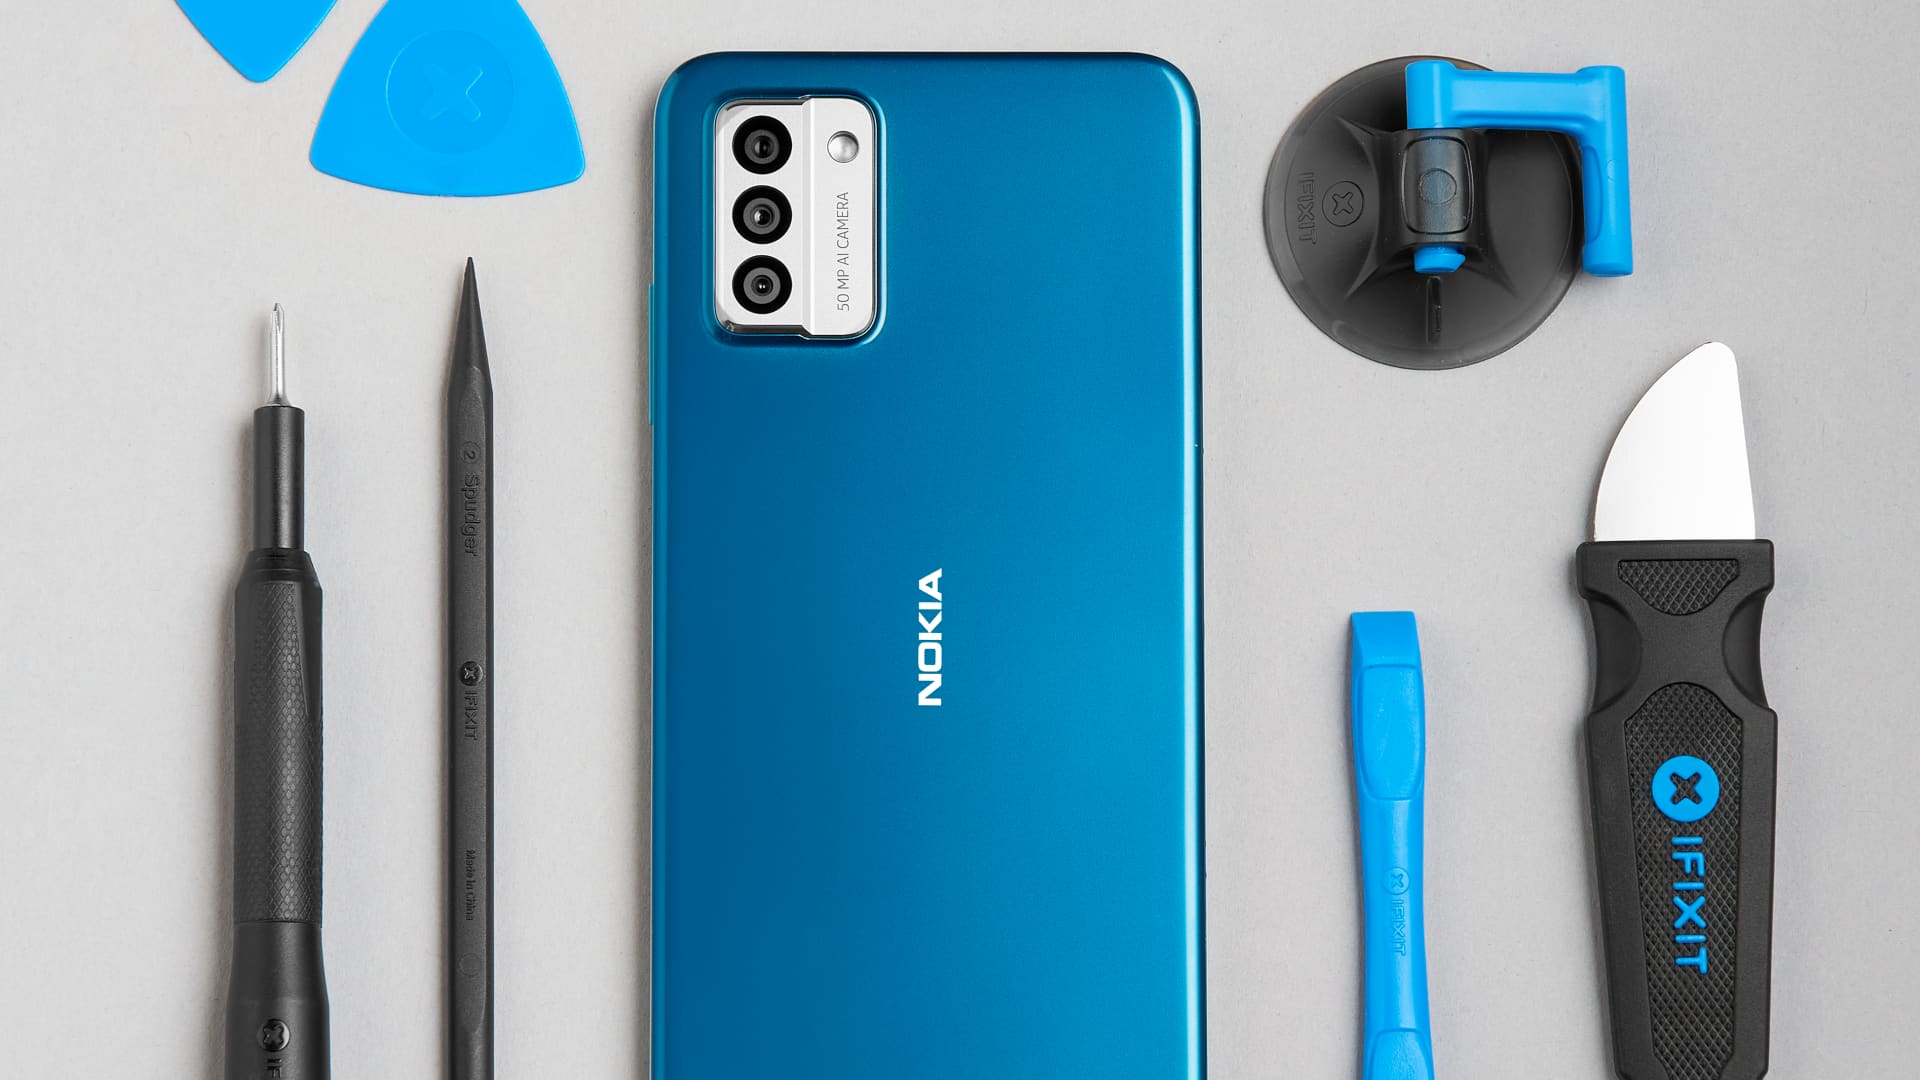 Nokia launches smartphone you can fix yourself, jumping on 'right to repair' trend